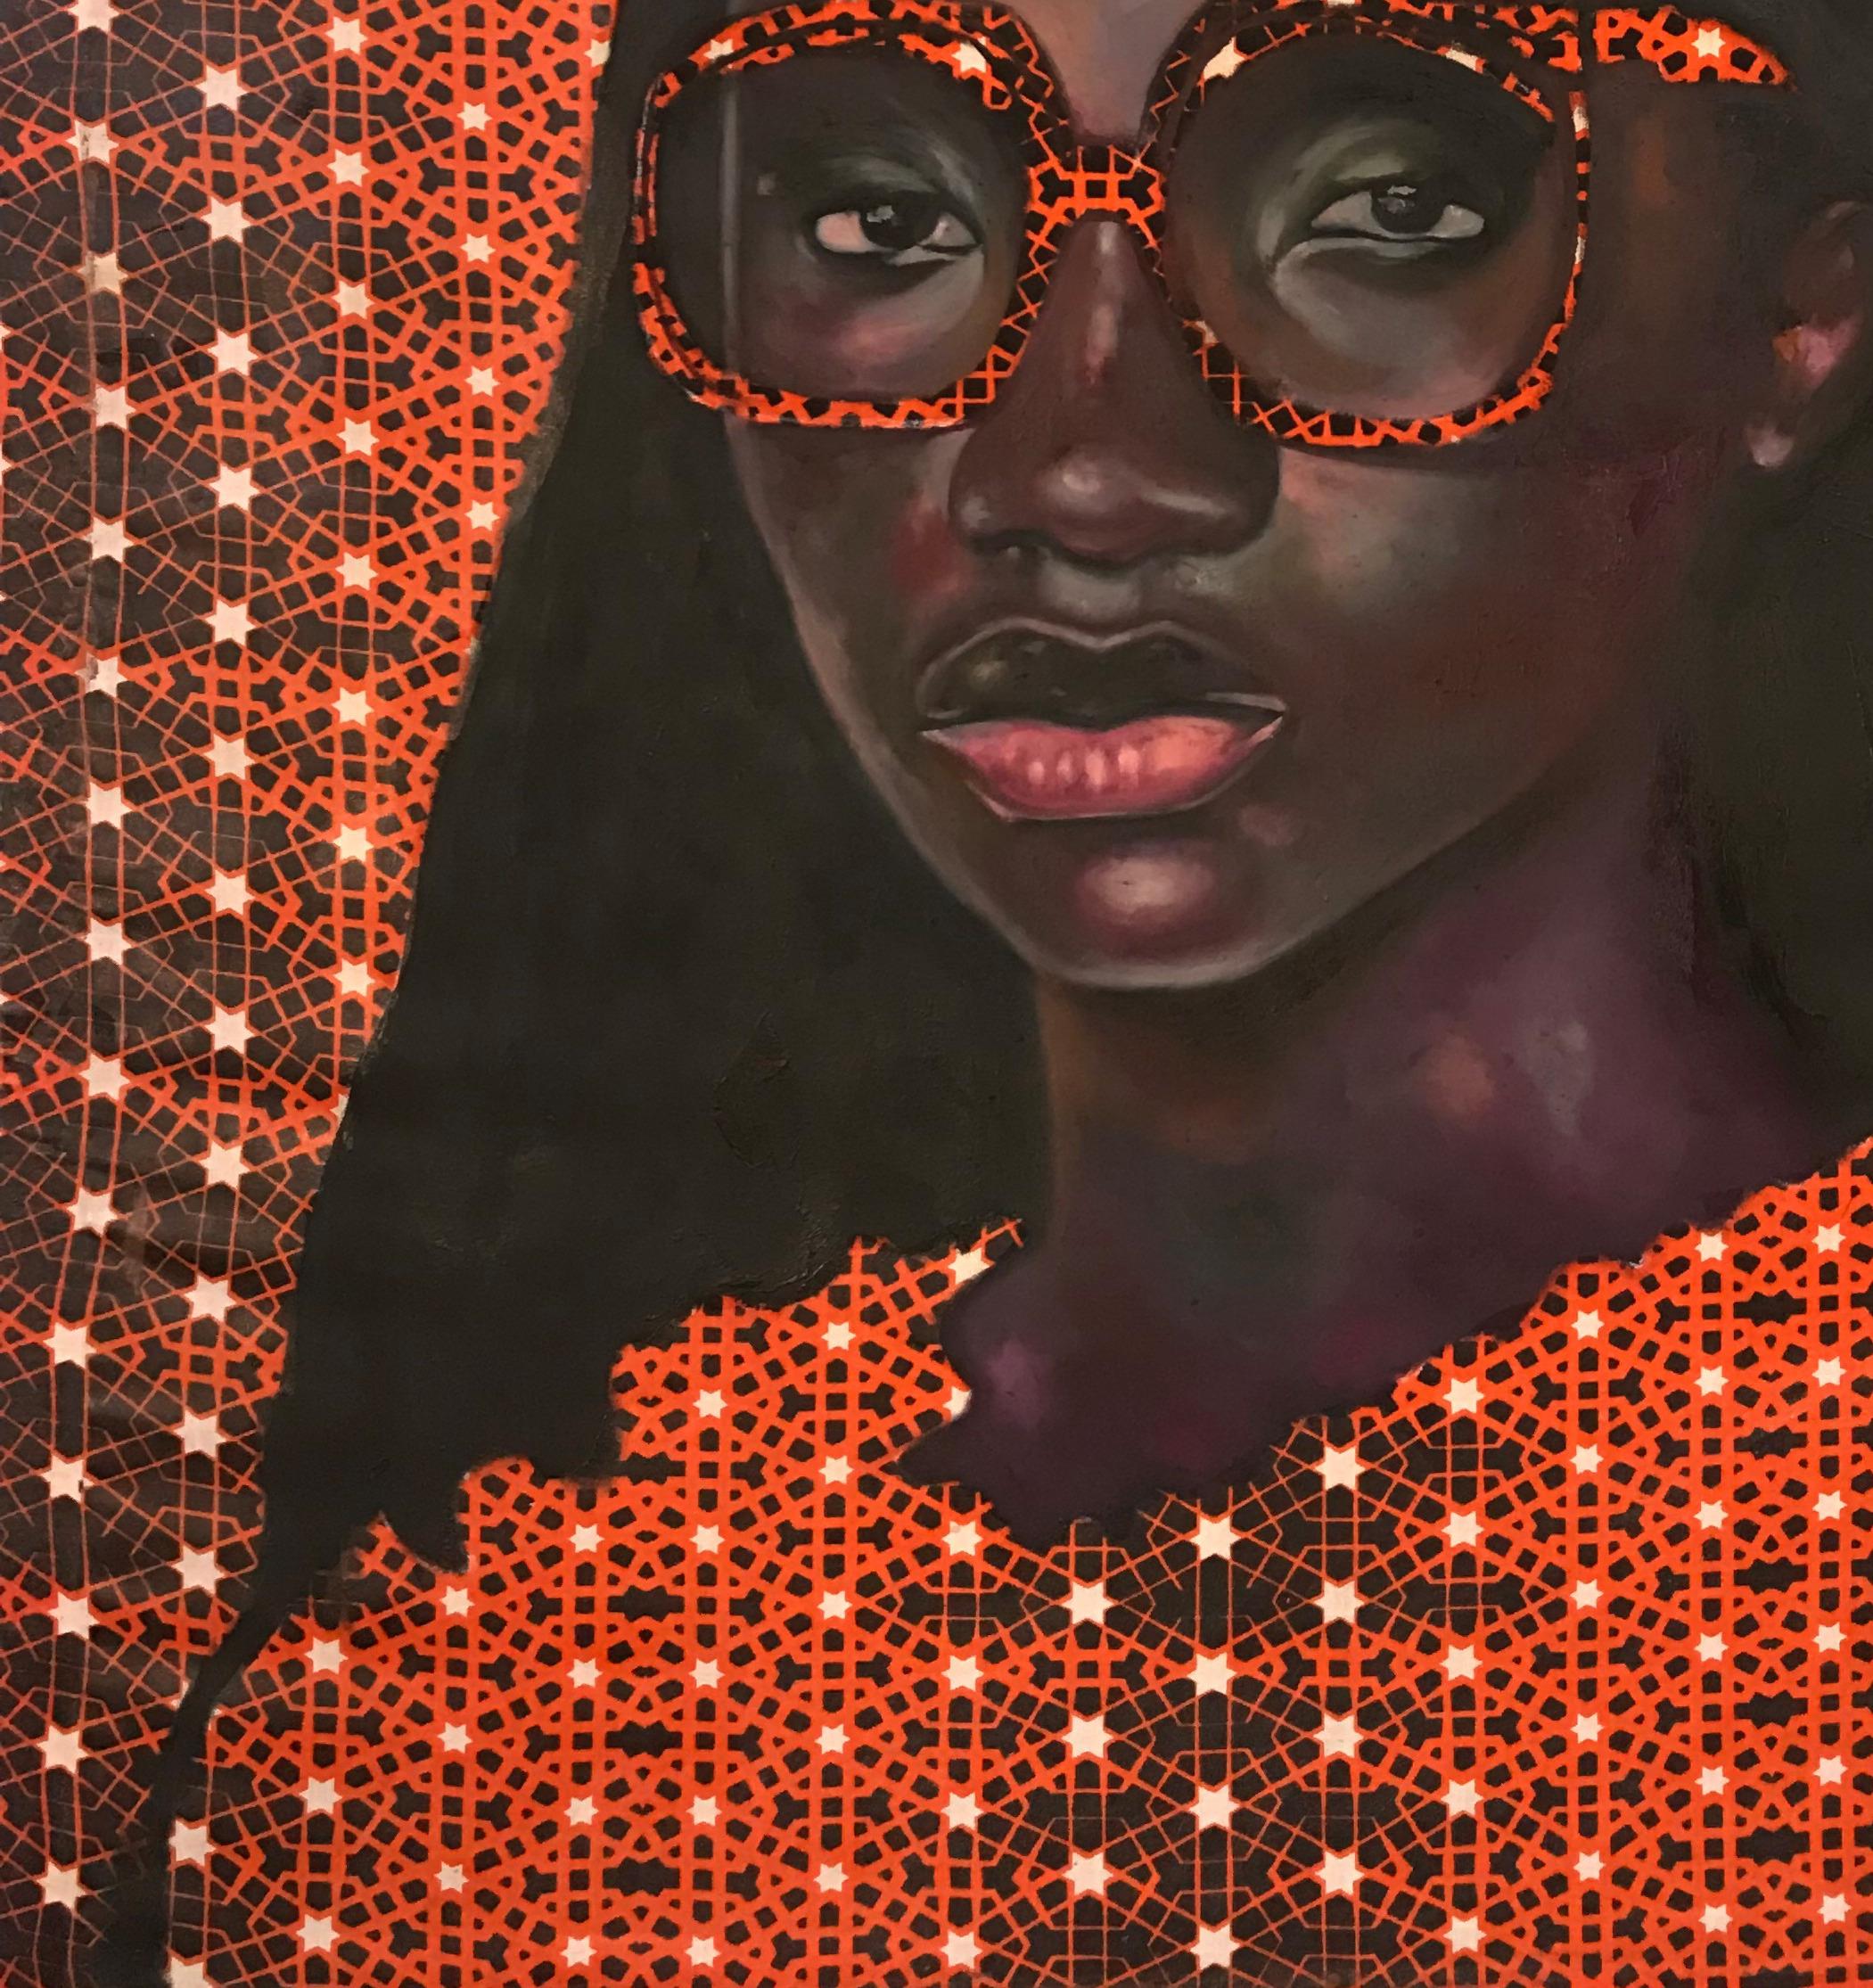 Beauty is What I Posessed - Brown Figurative Painting by Bakare Abubakri-sideeq Babatunde